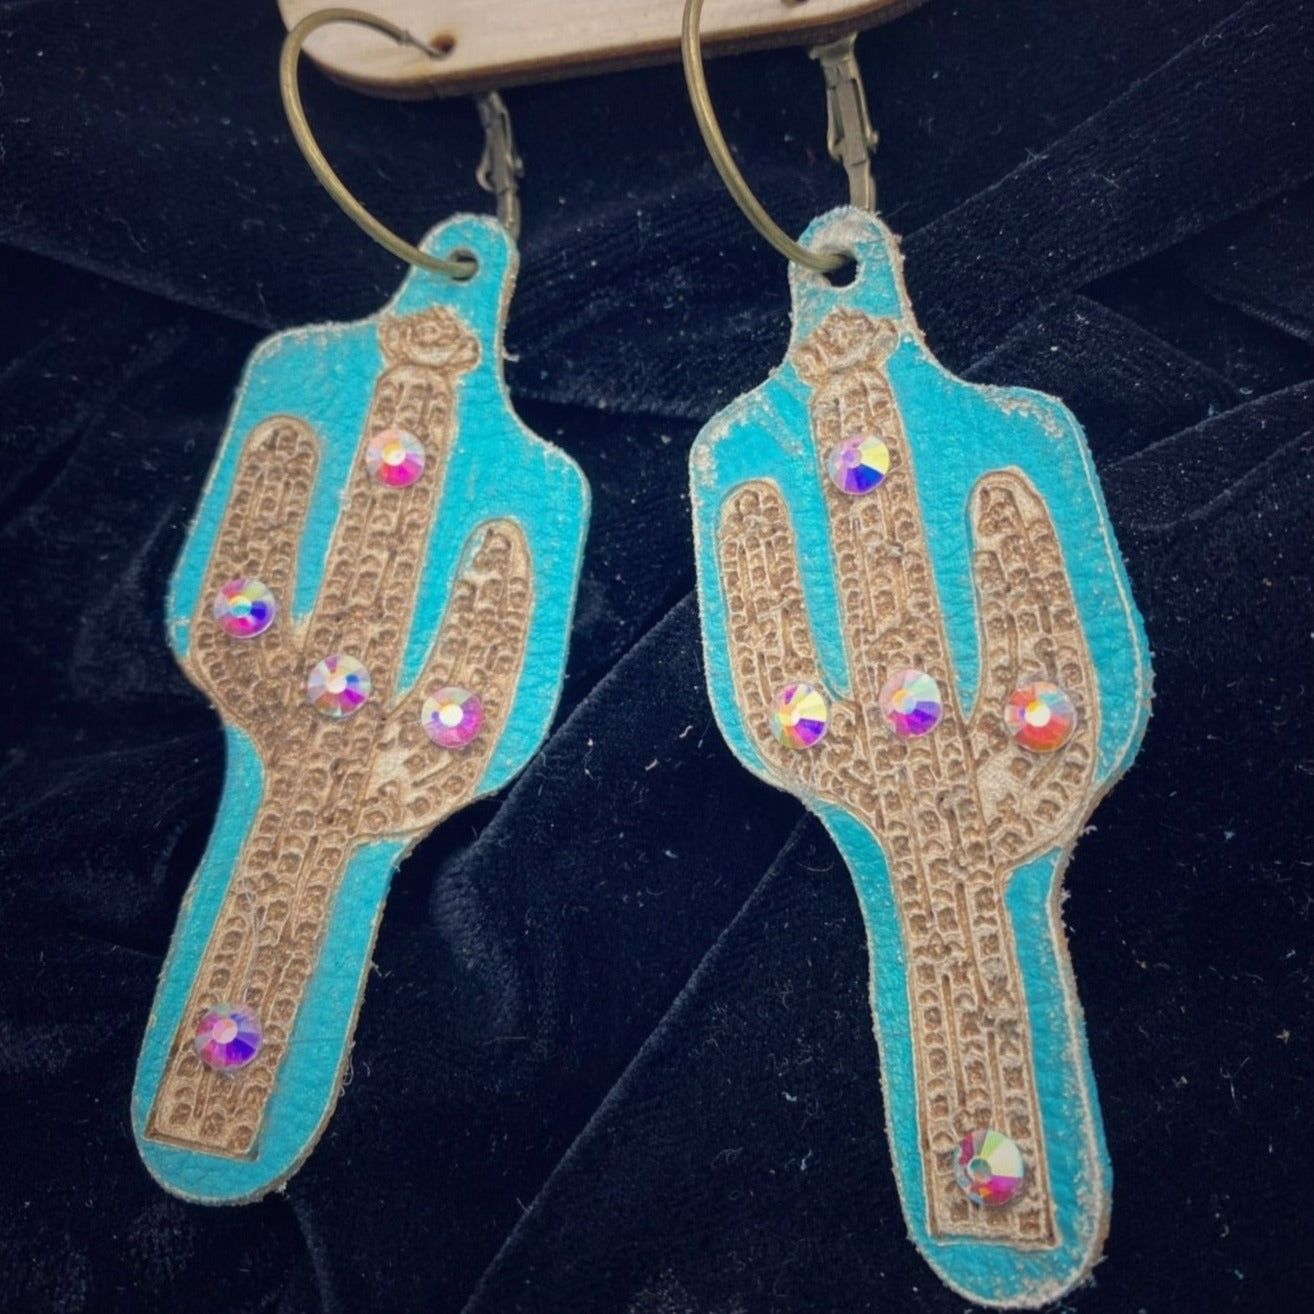 Cactus Hand Painted Leather Earrings